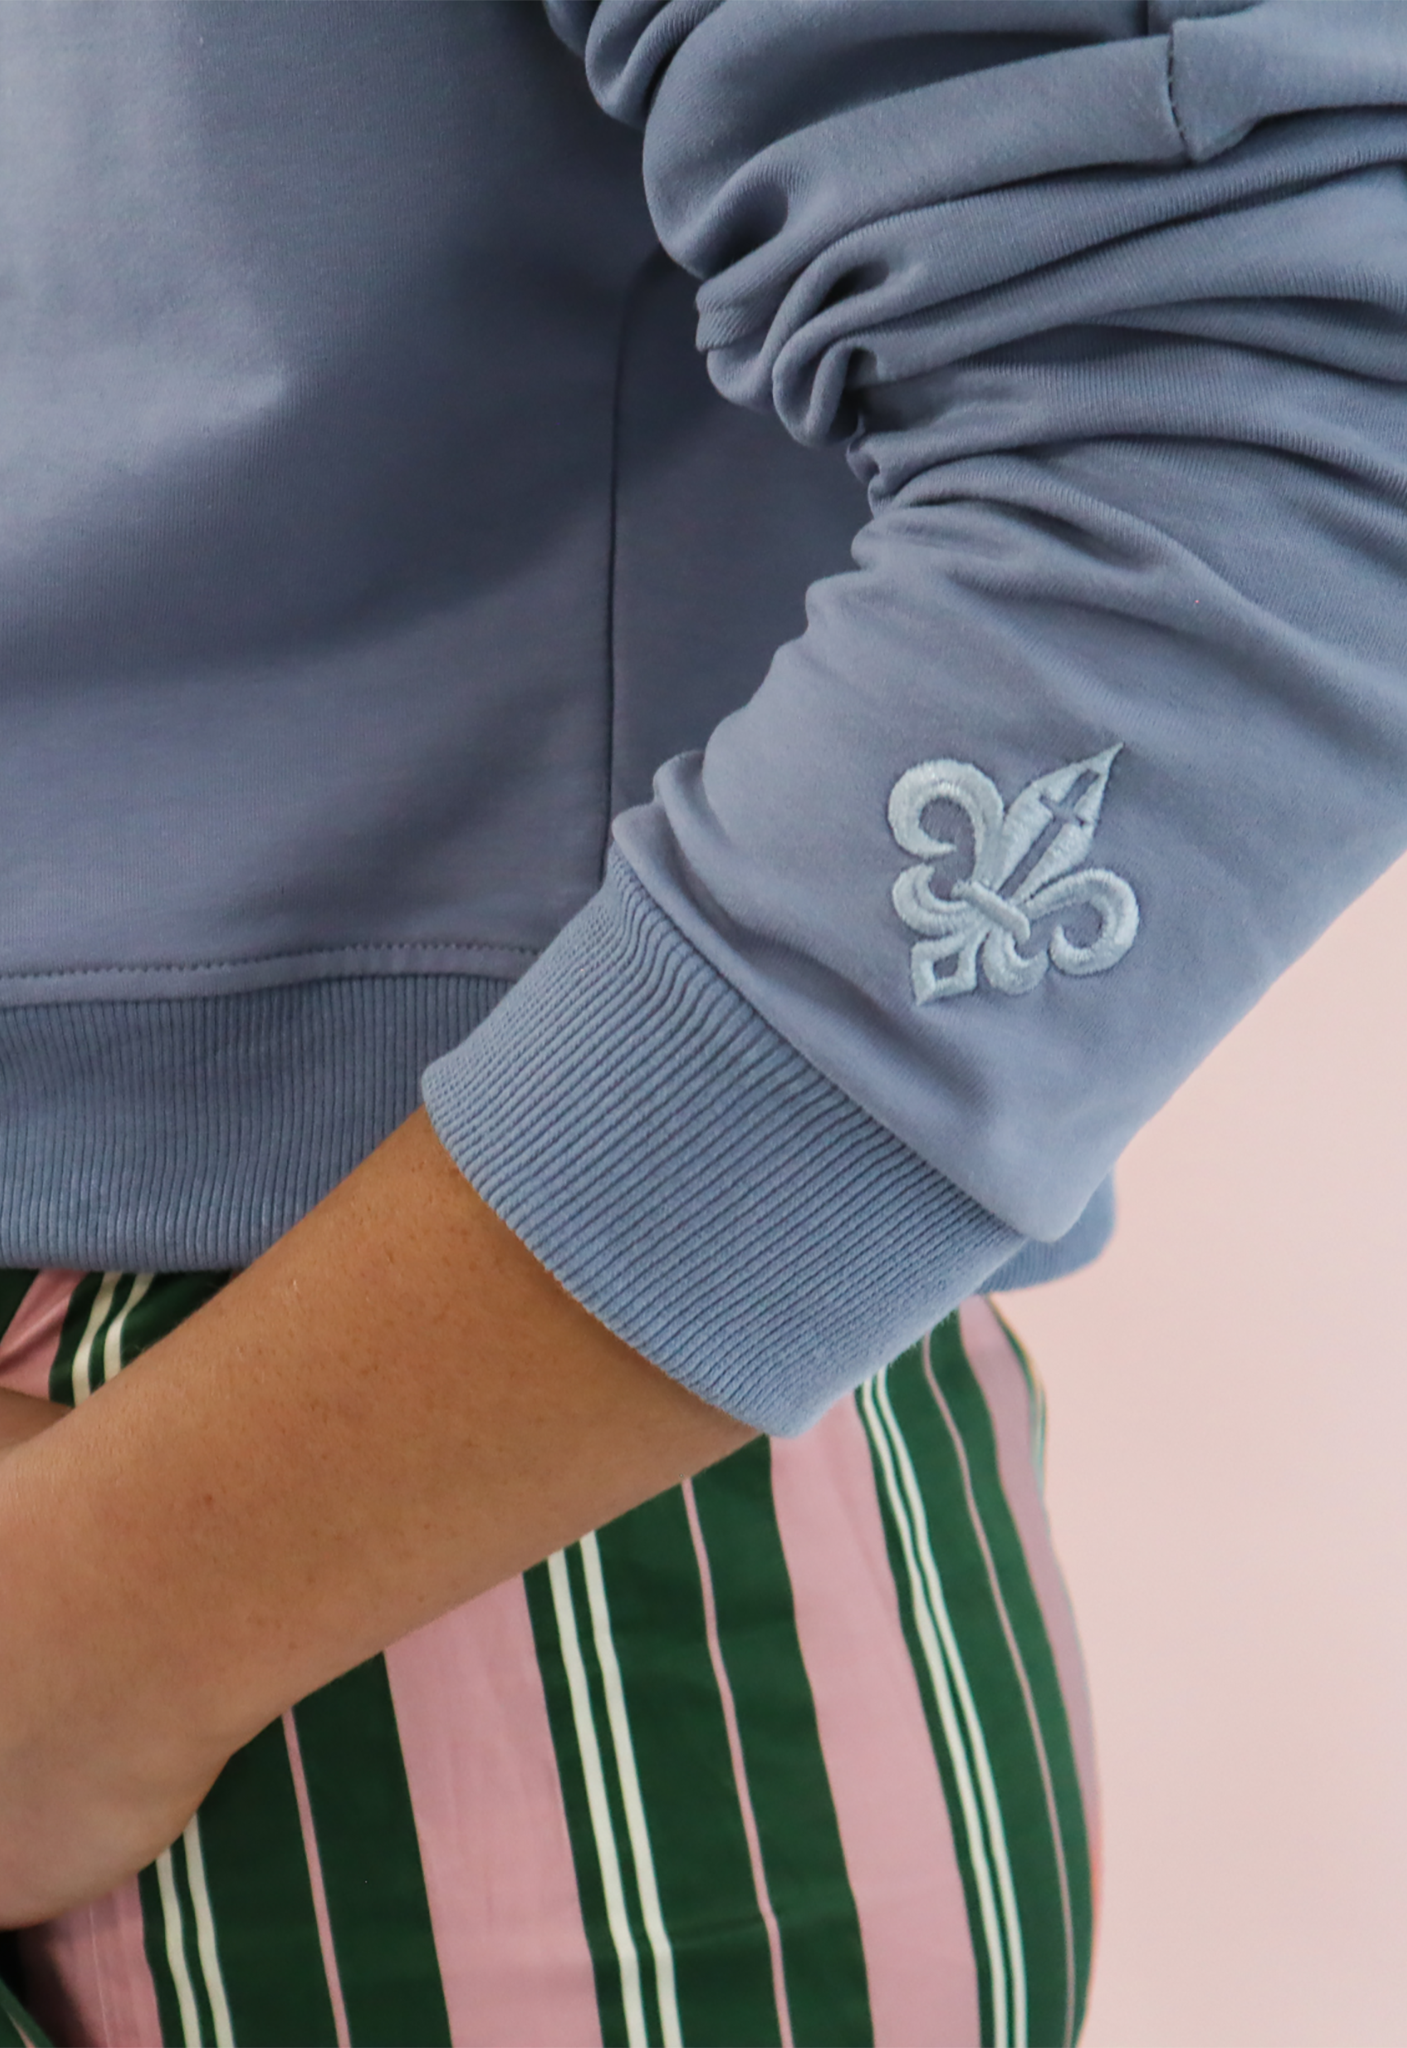 Close up of sleeve showing embroidered detail of Saint Liberté logo